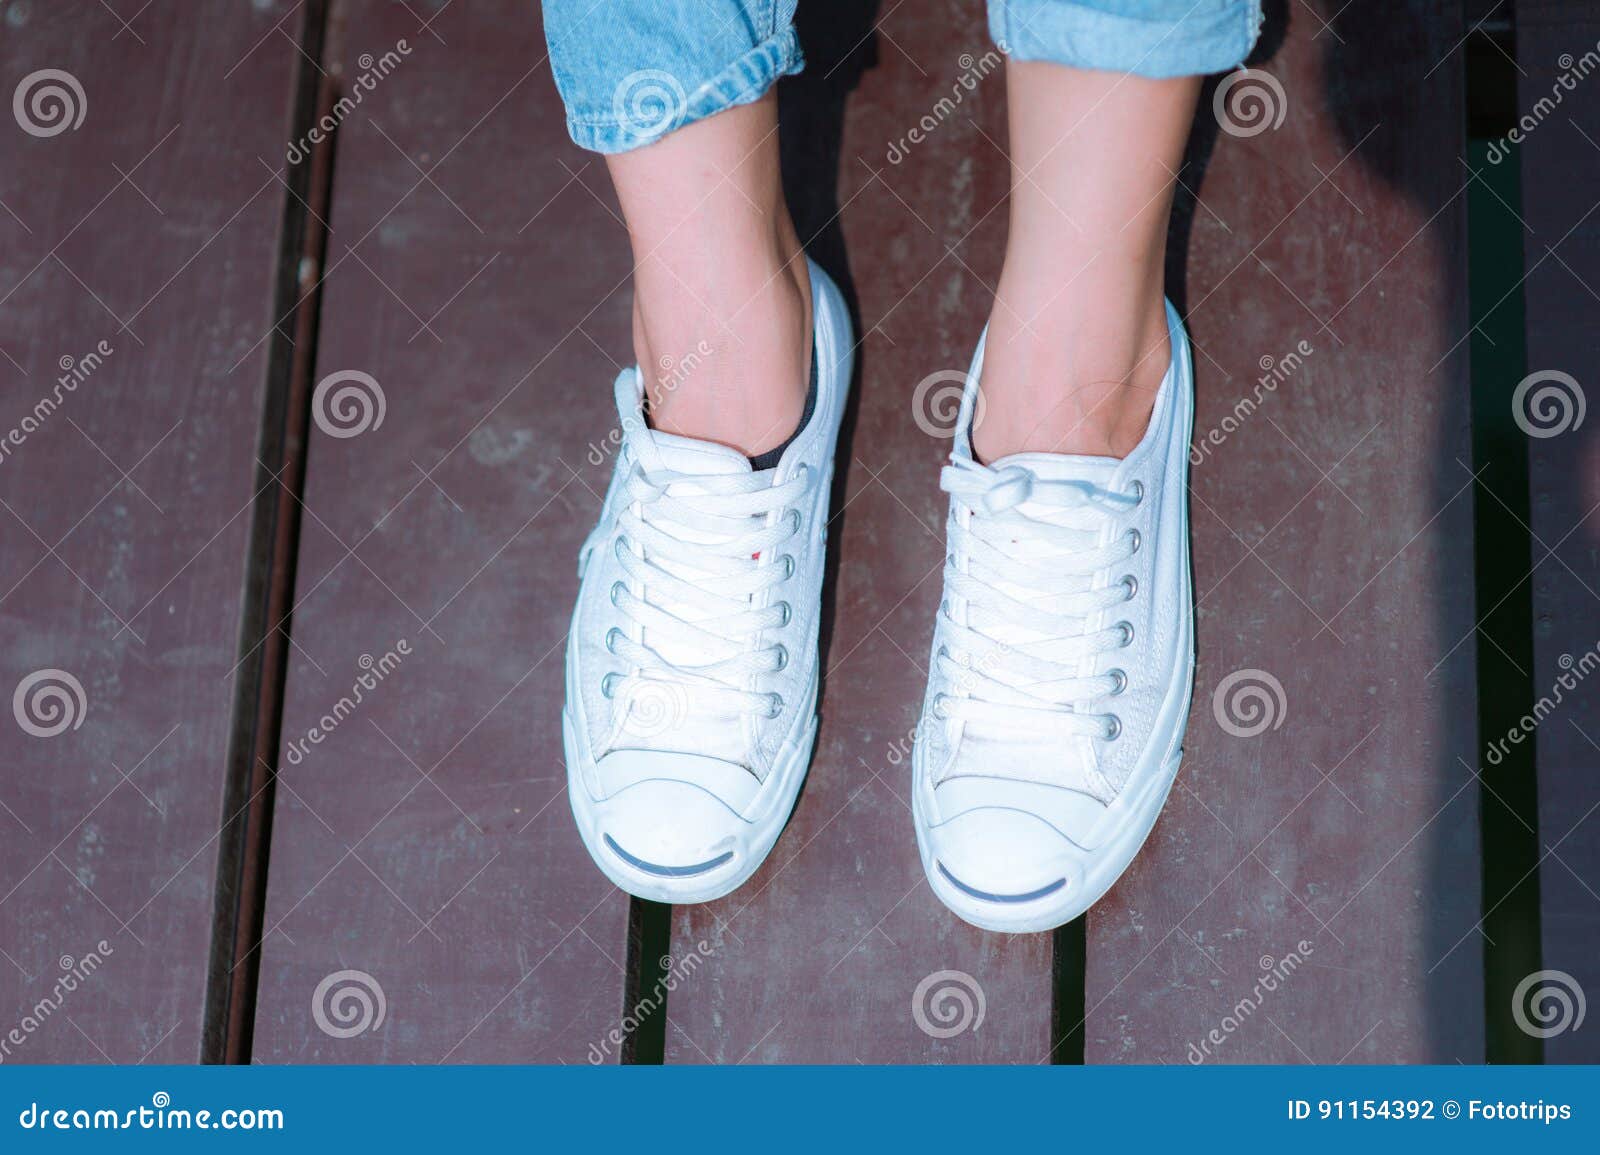 White Shoes,Fashion Woman`s Legs With Sneakers Seated On Wooden Floor ...